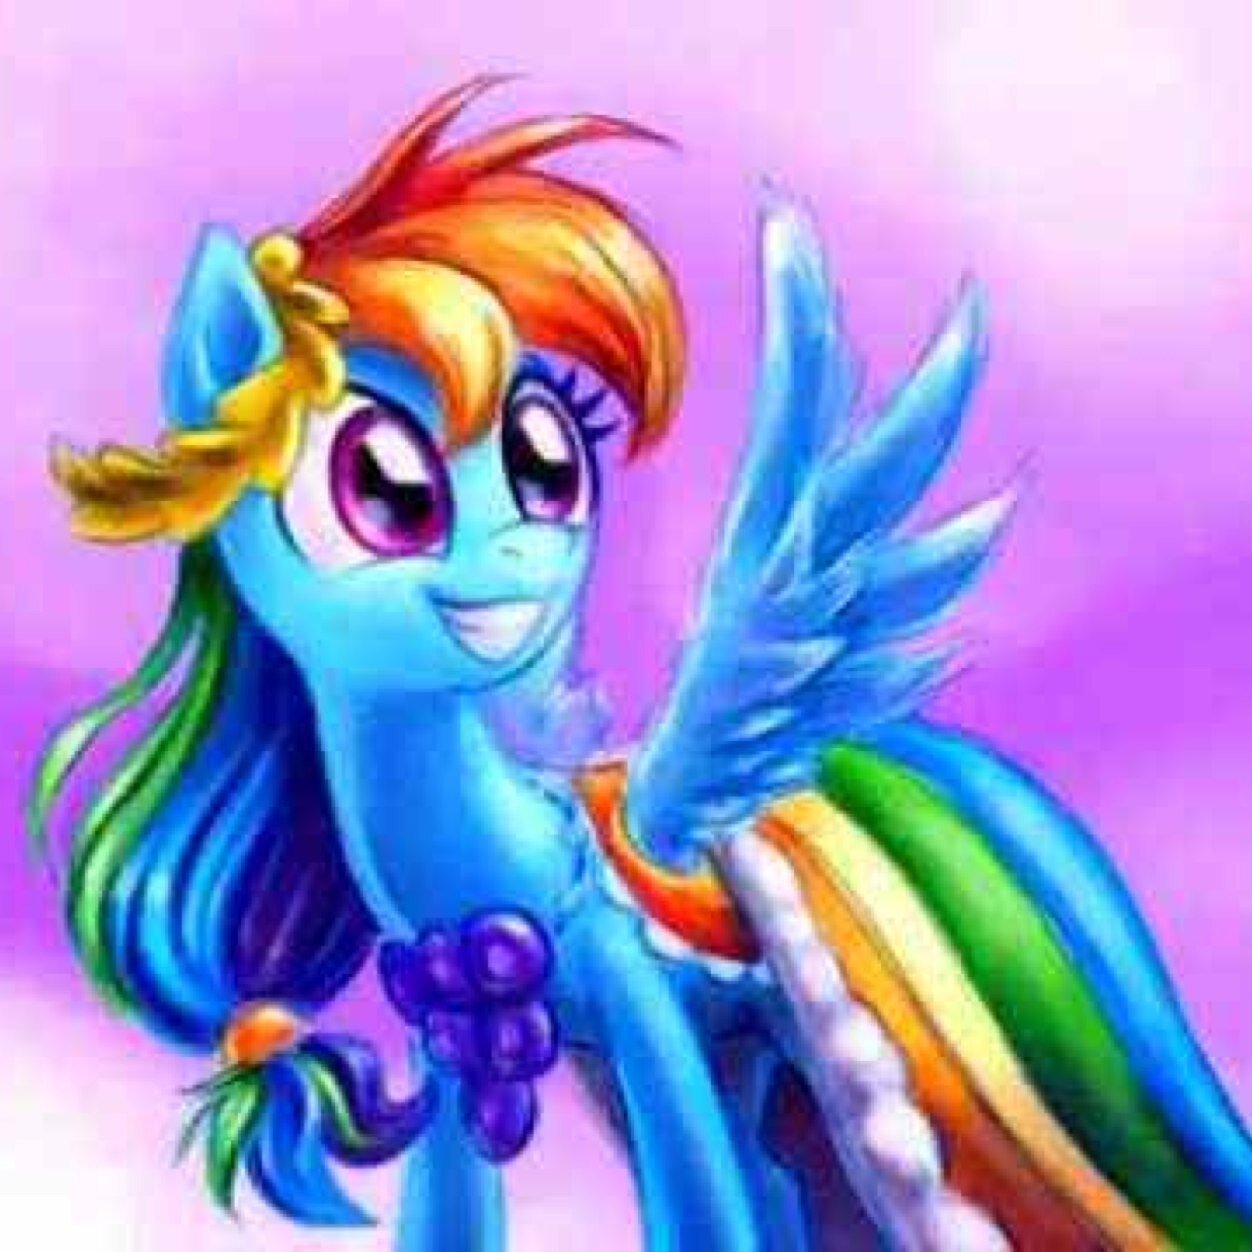 Hey everypony RainBow Dash here thee one and only flying around high above the clouds maybe you've heard of me my SSP is: @Downfall_Mlp MF is @WTNV_Hinny